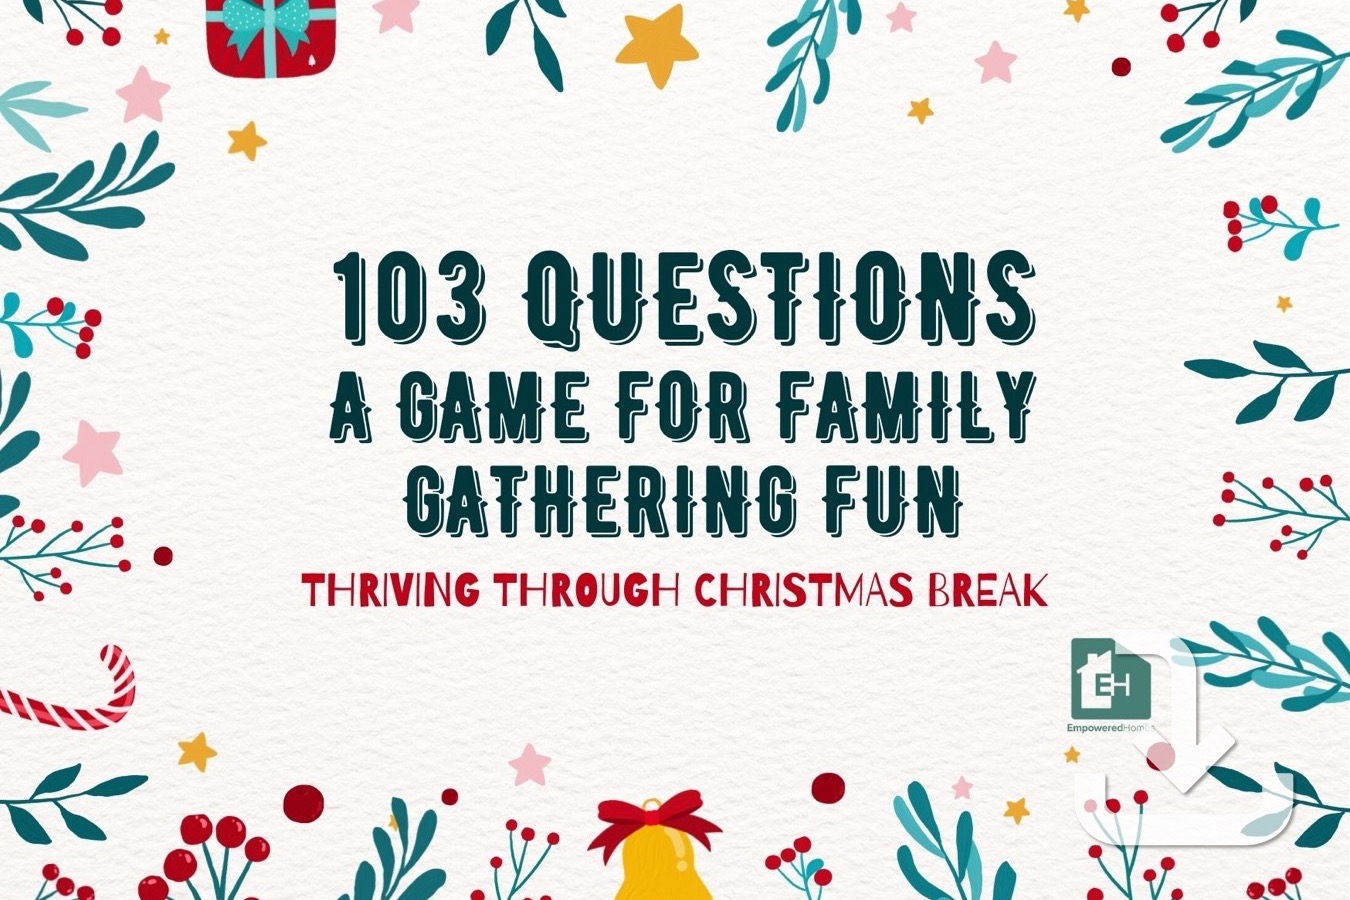 103 Questions for Family Gathering Fun